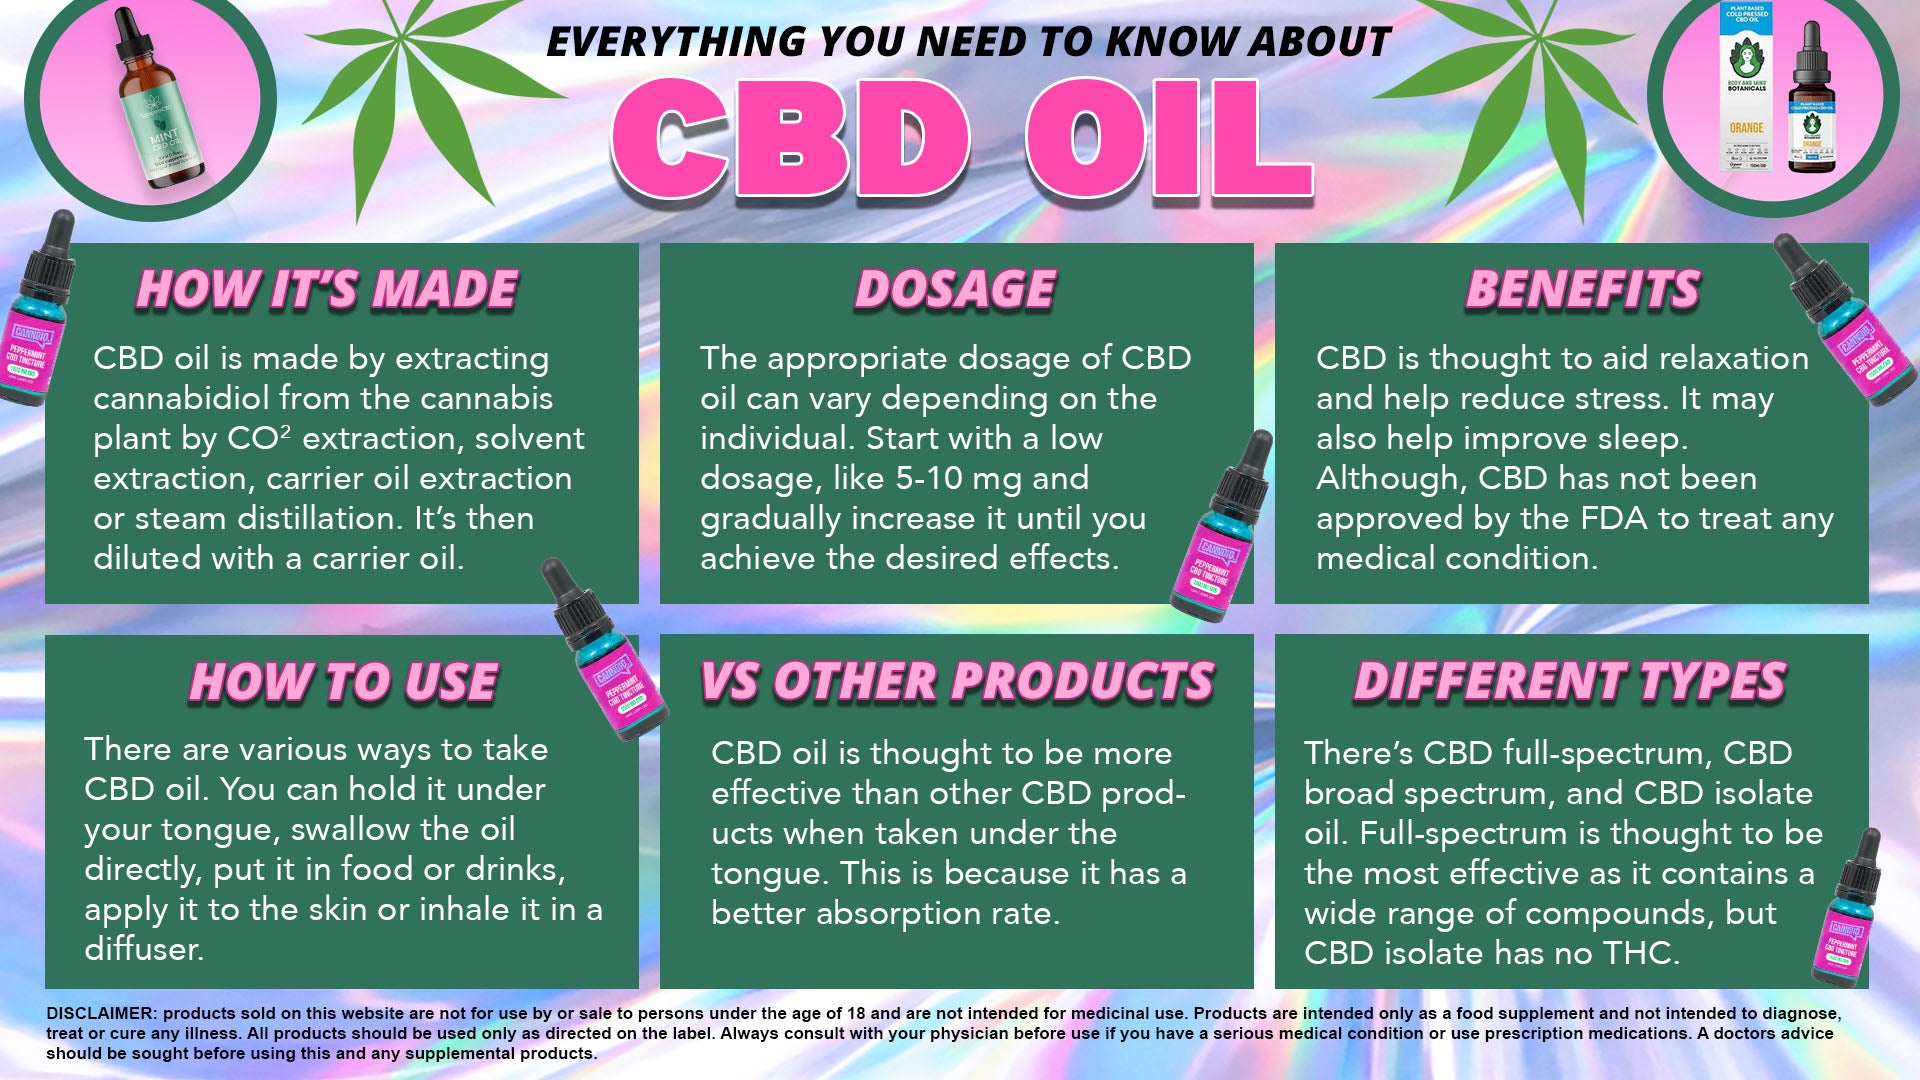 How Long Does CBD Oil Take to Work?